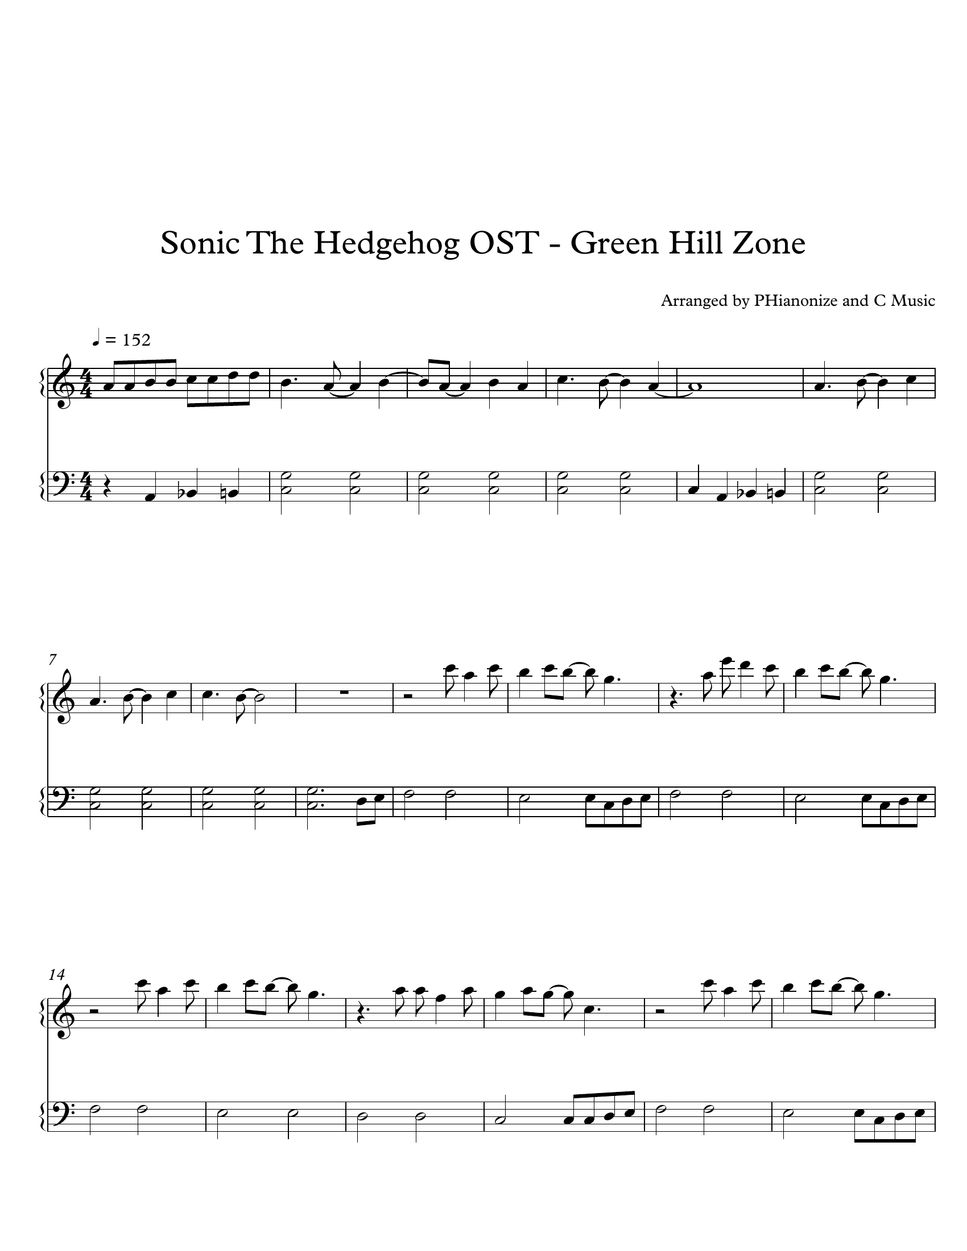 Sonic the Hedgehog - Green Hill Zone Sheet music for Piano, Violin